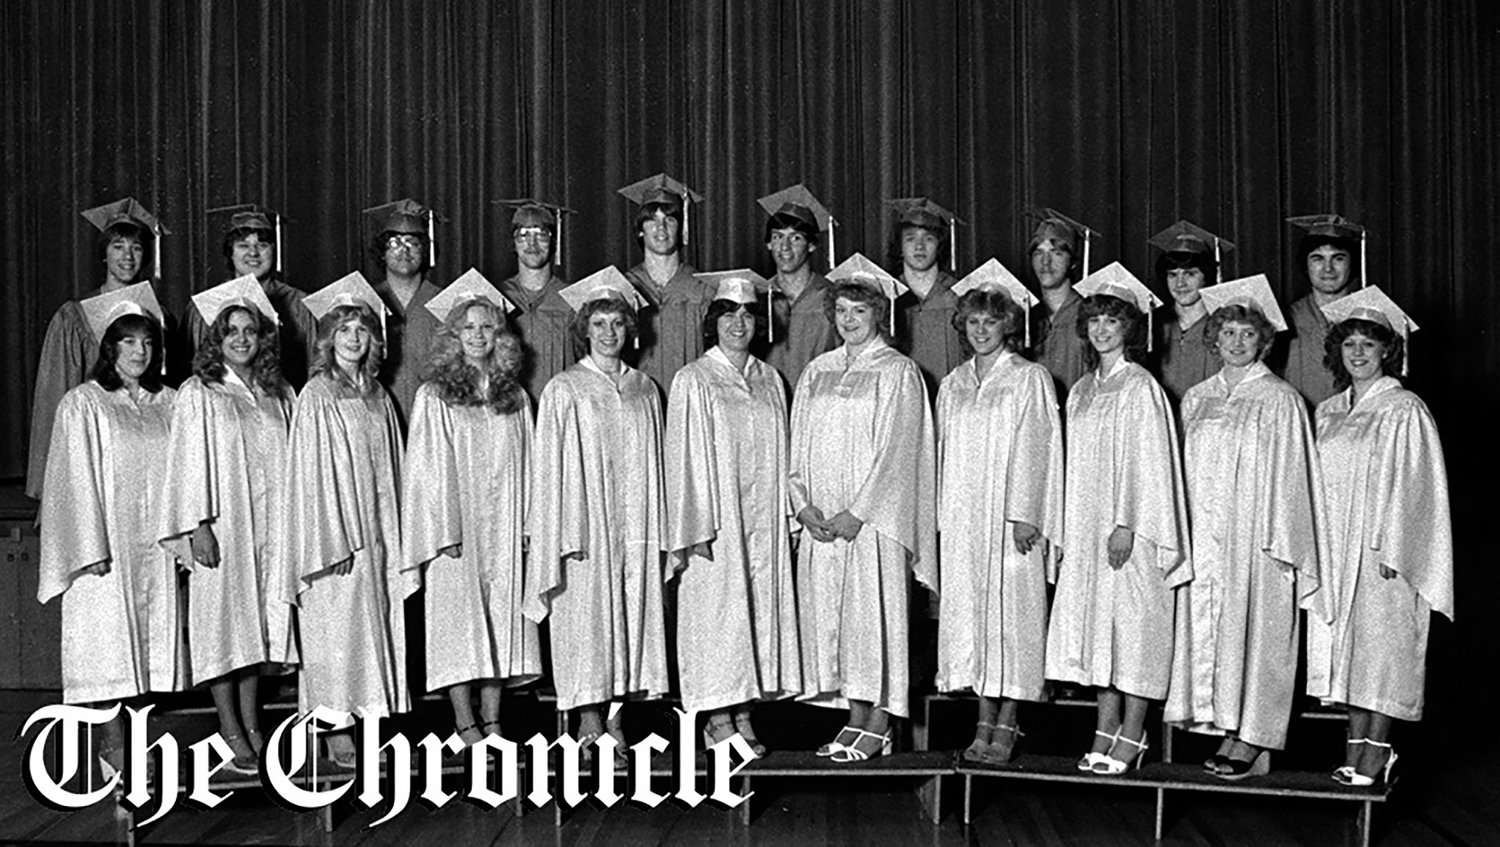 Pe Ell School graduates are pictured May 4 1982, in this photograph from The Chronicle’s archives.